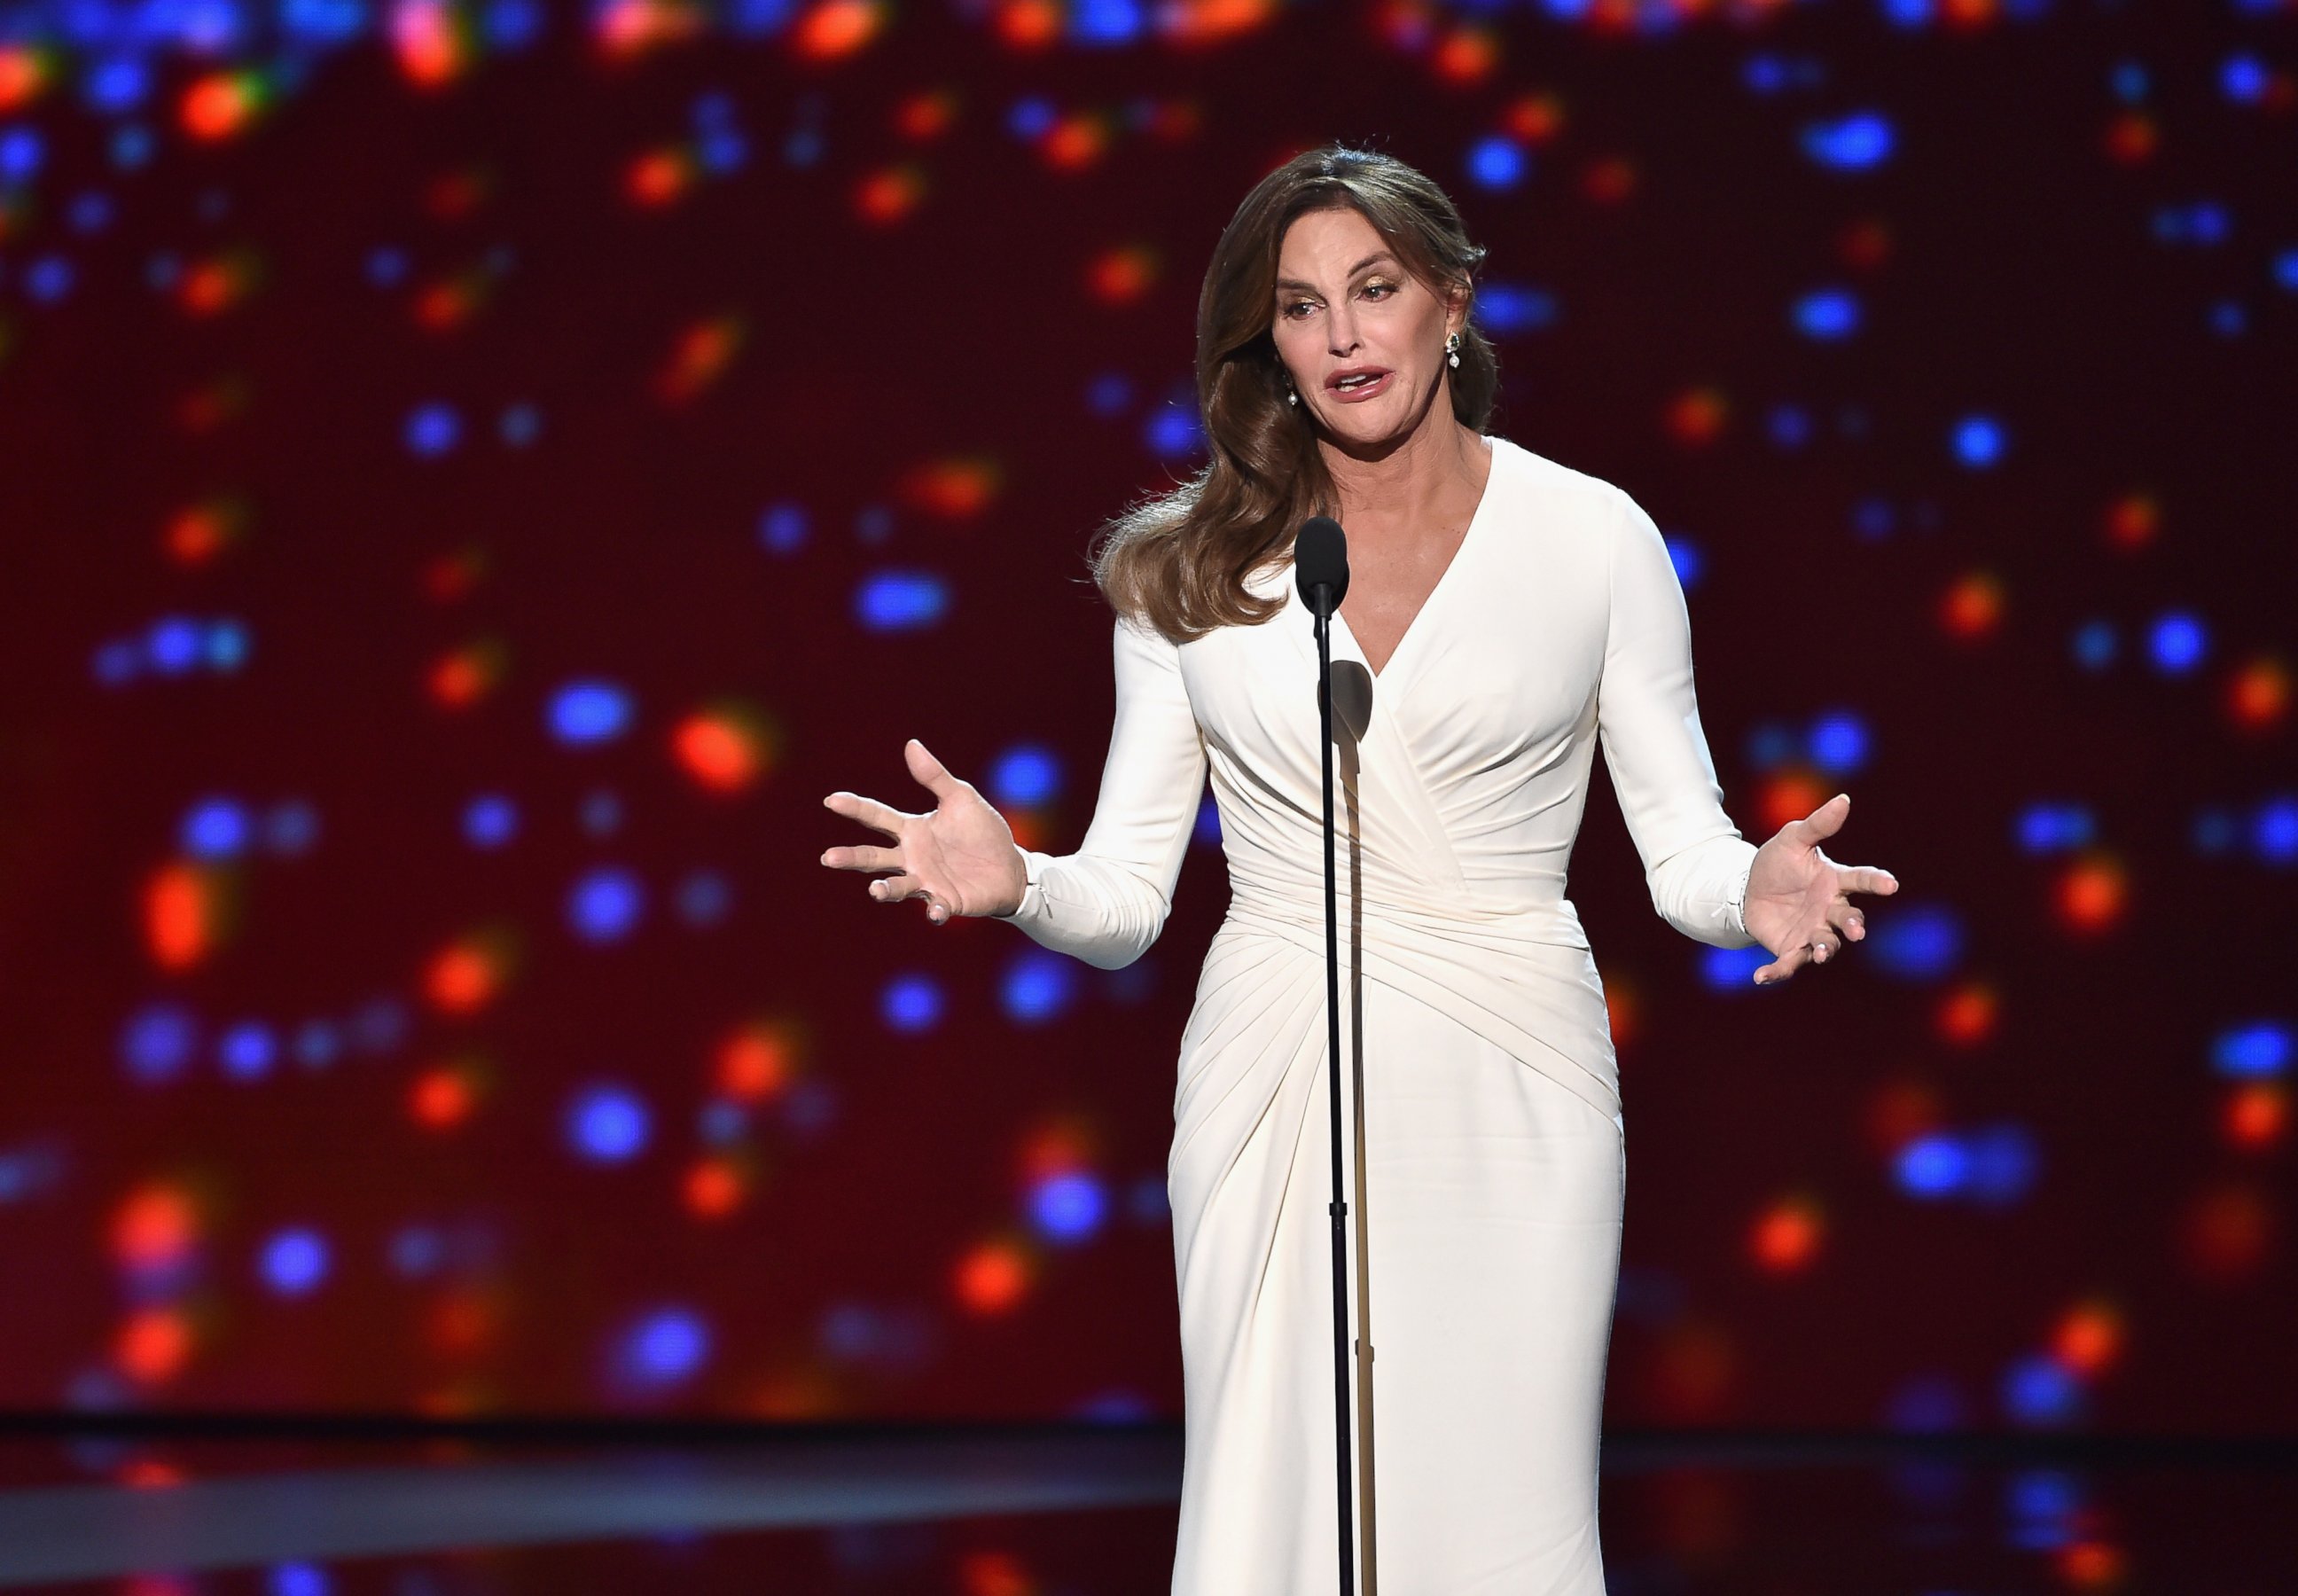 PHOTO: Caitlyn Jenner accepts the Arthur Ashe Courage Award onstage during The 2015 ESPYS at Microsoft Theater on July 15, 2015 in Los Angeles, Calif.